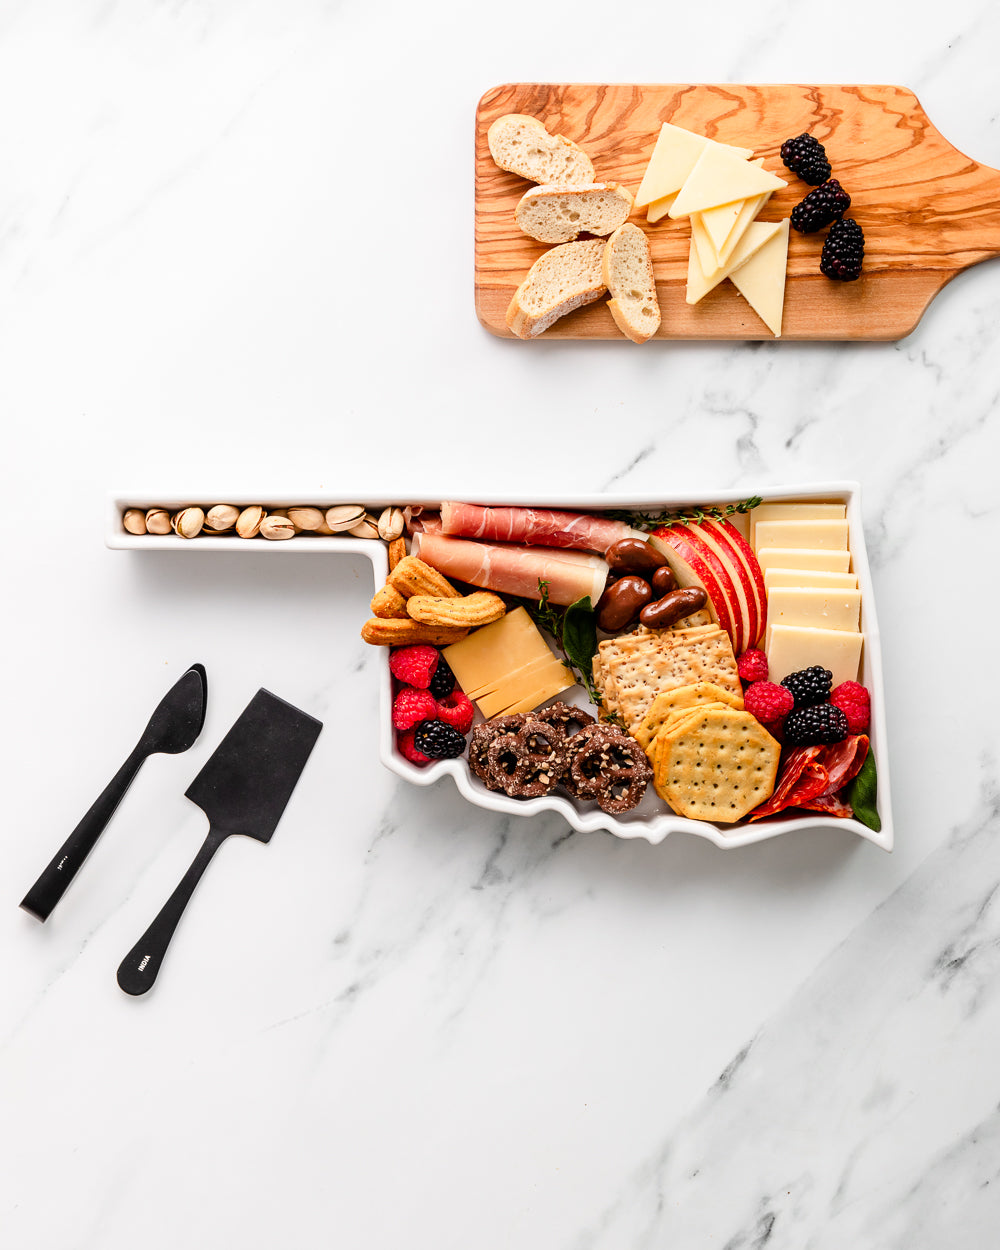 charcuterie board with cheese and cured meats in a Oklahoma shaped serving tray platter dish